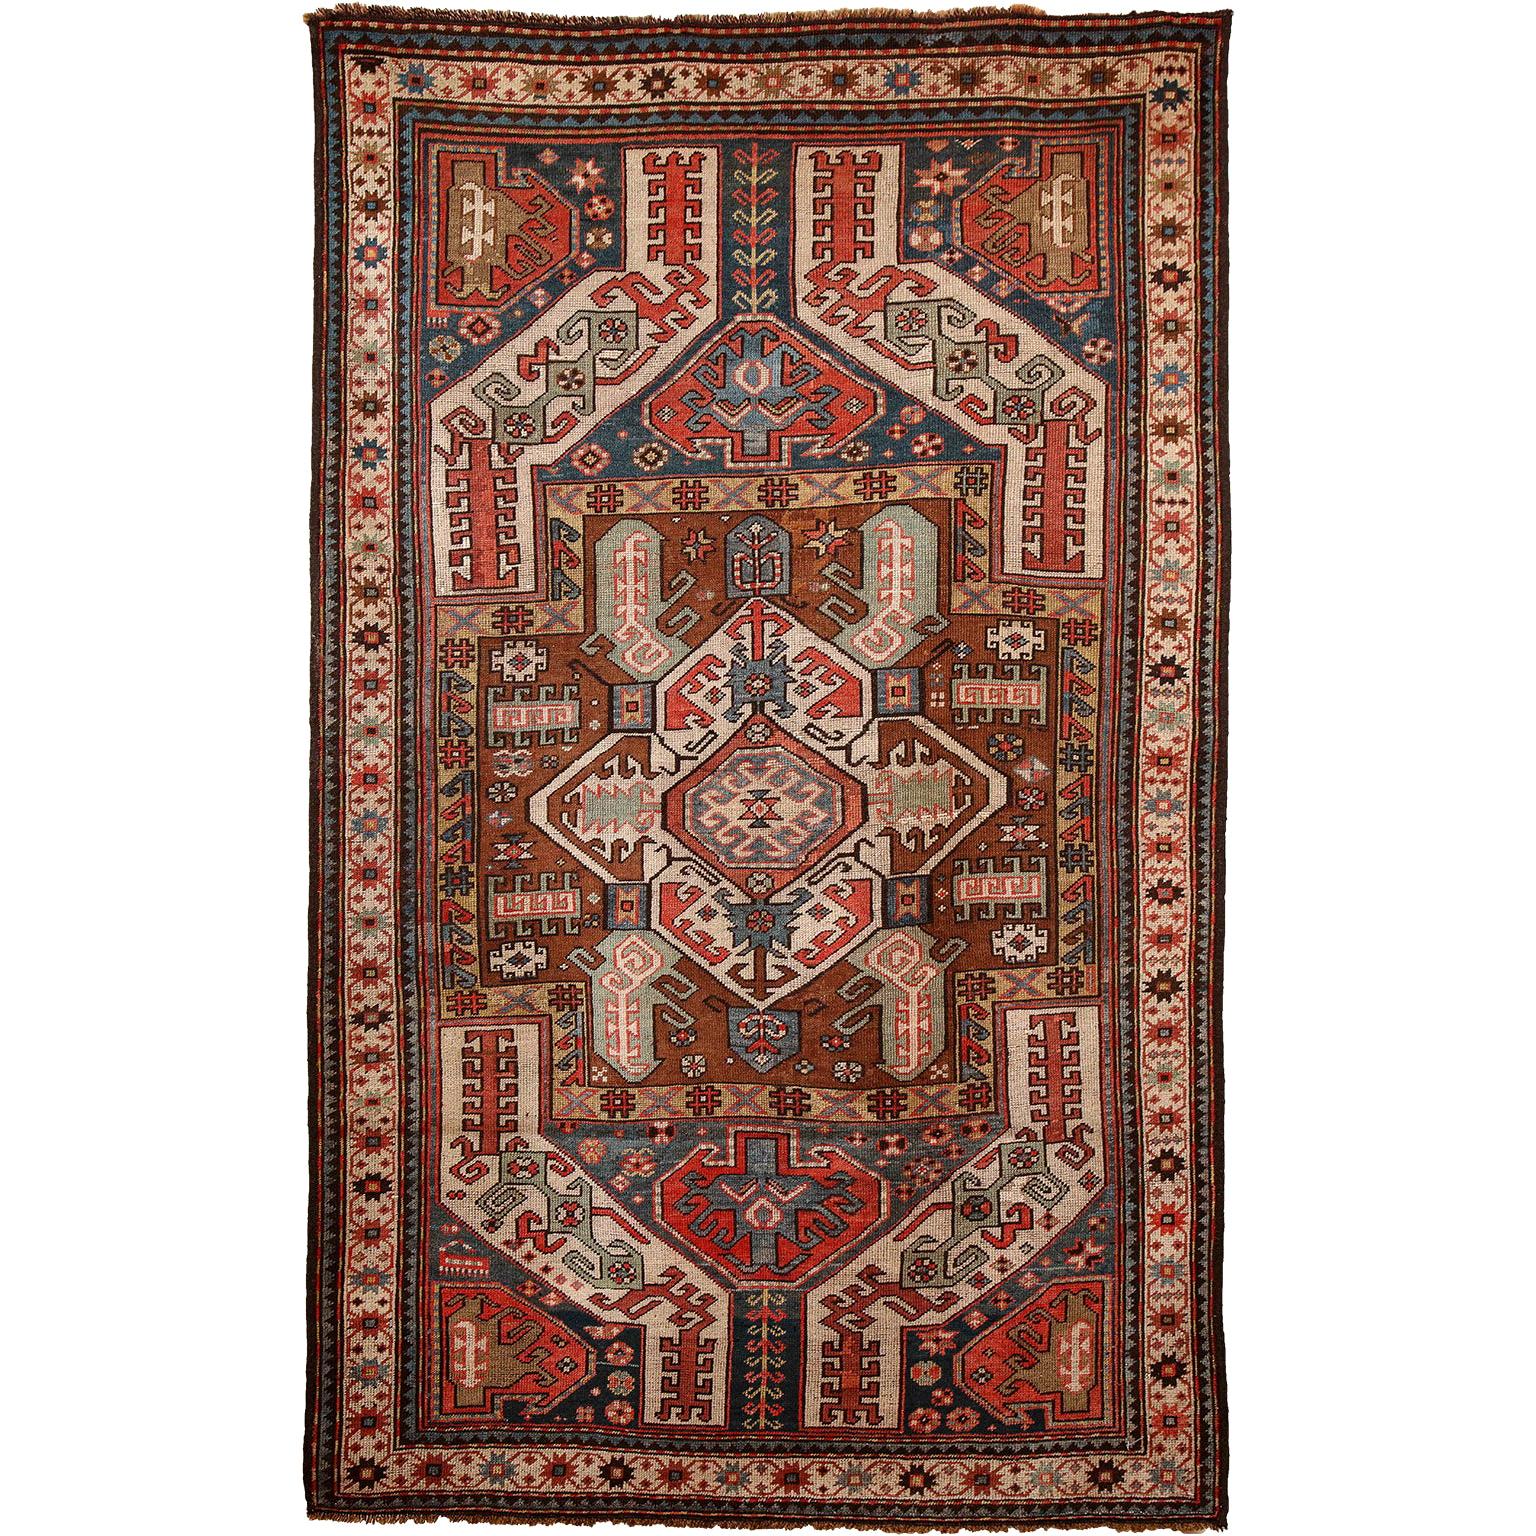 Antique 1880s Caucasian Rug, Wool, Blue, Green, Red, 4' x 6' For Sale